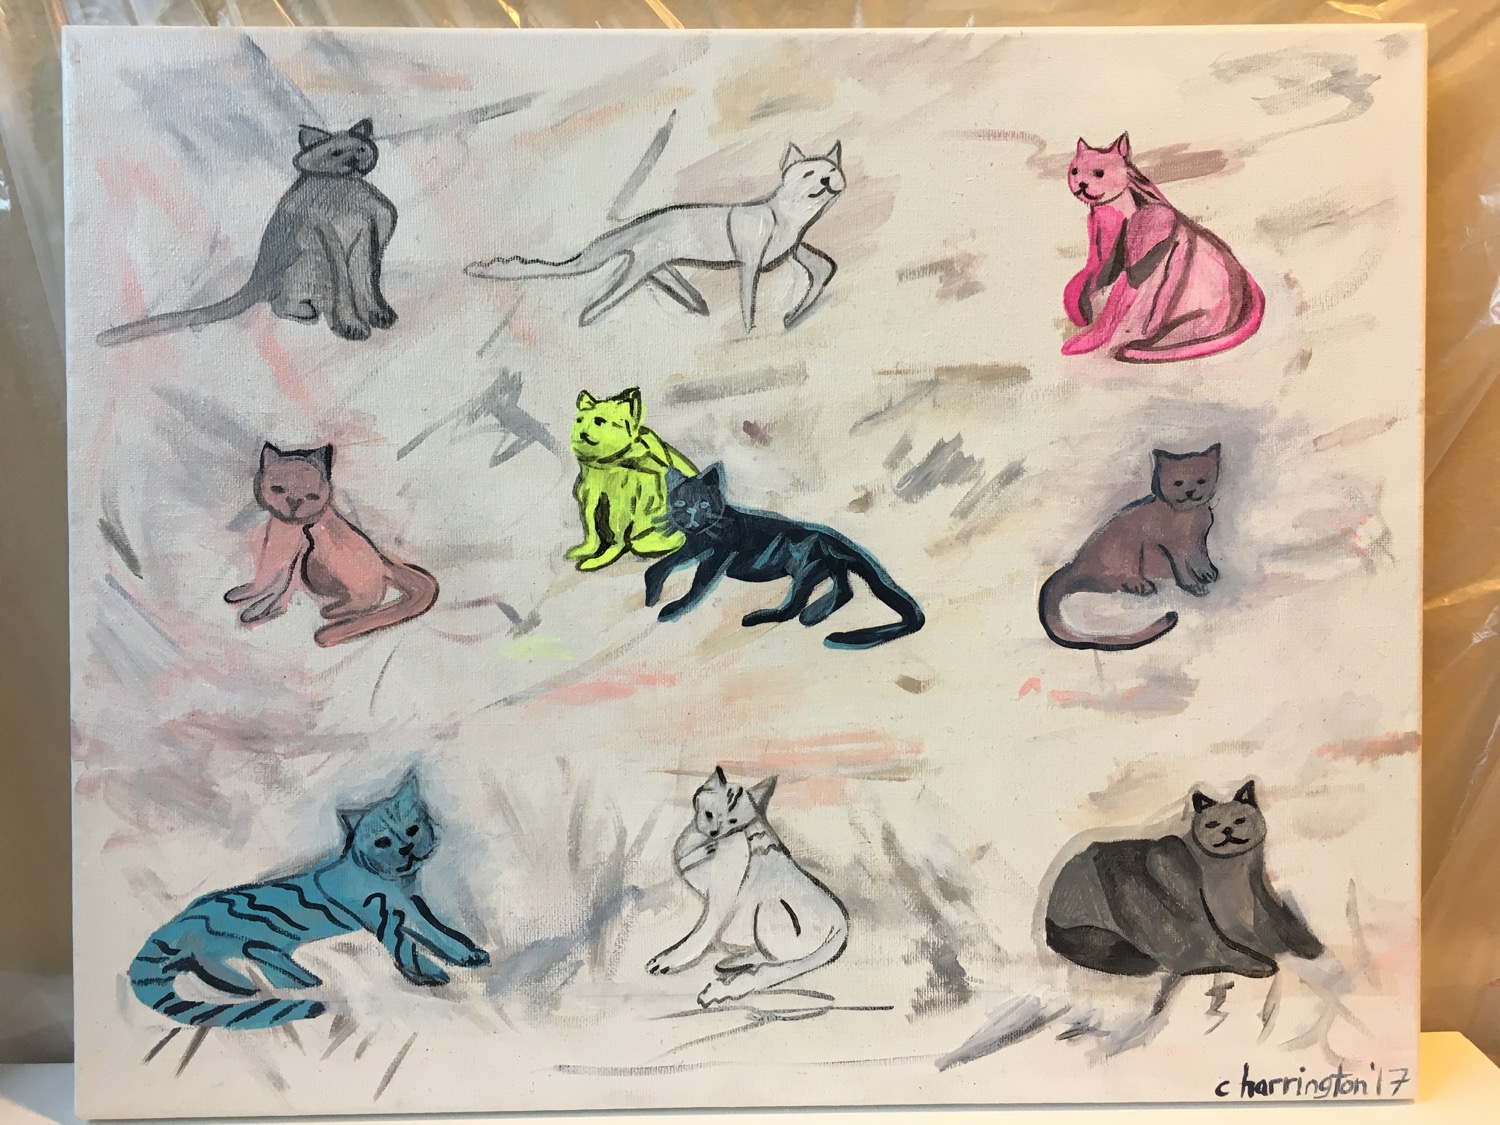 Assorted Cats, Acrylic on Canvas, 16 x 20 inches, 2016